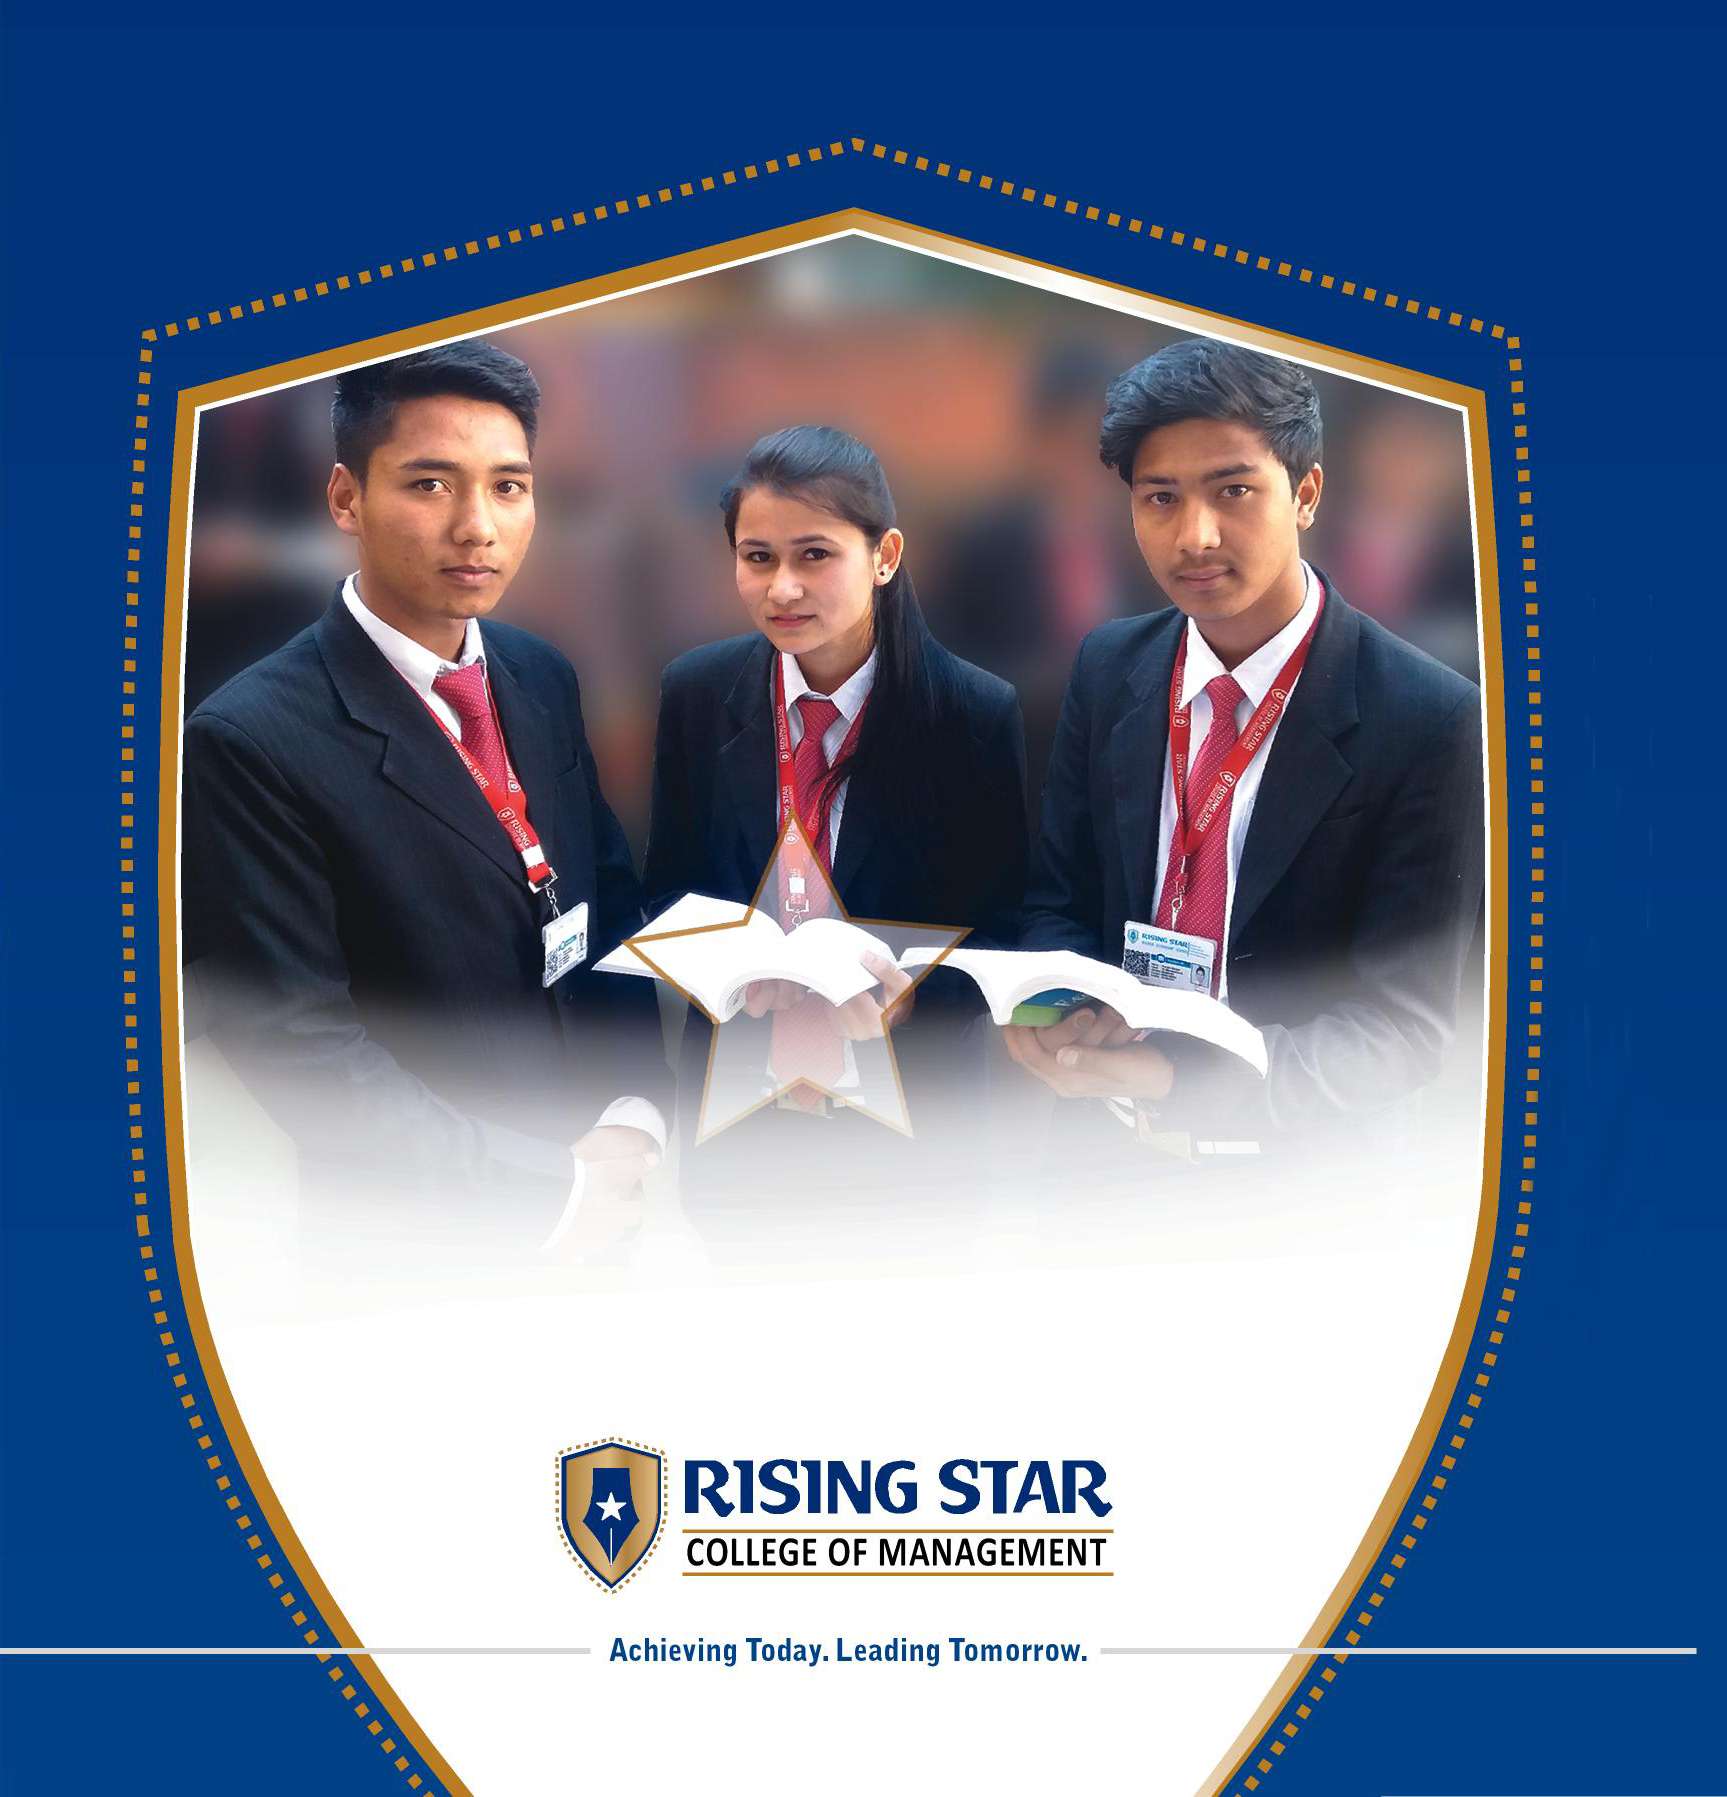 Rising Star College of Management